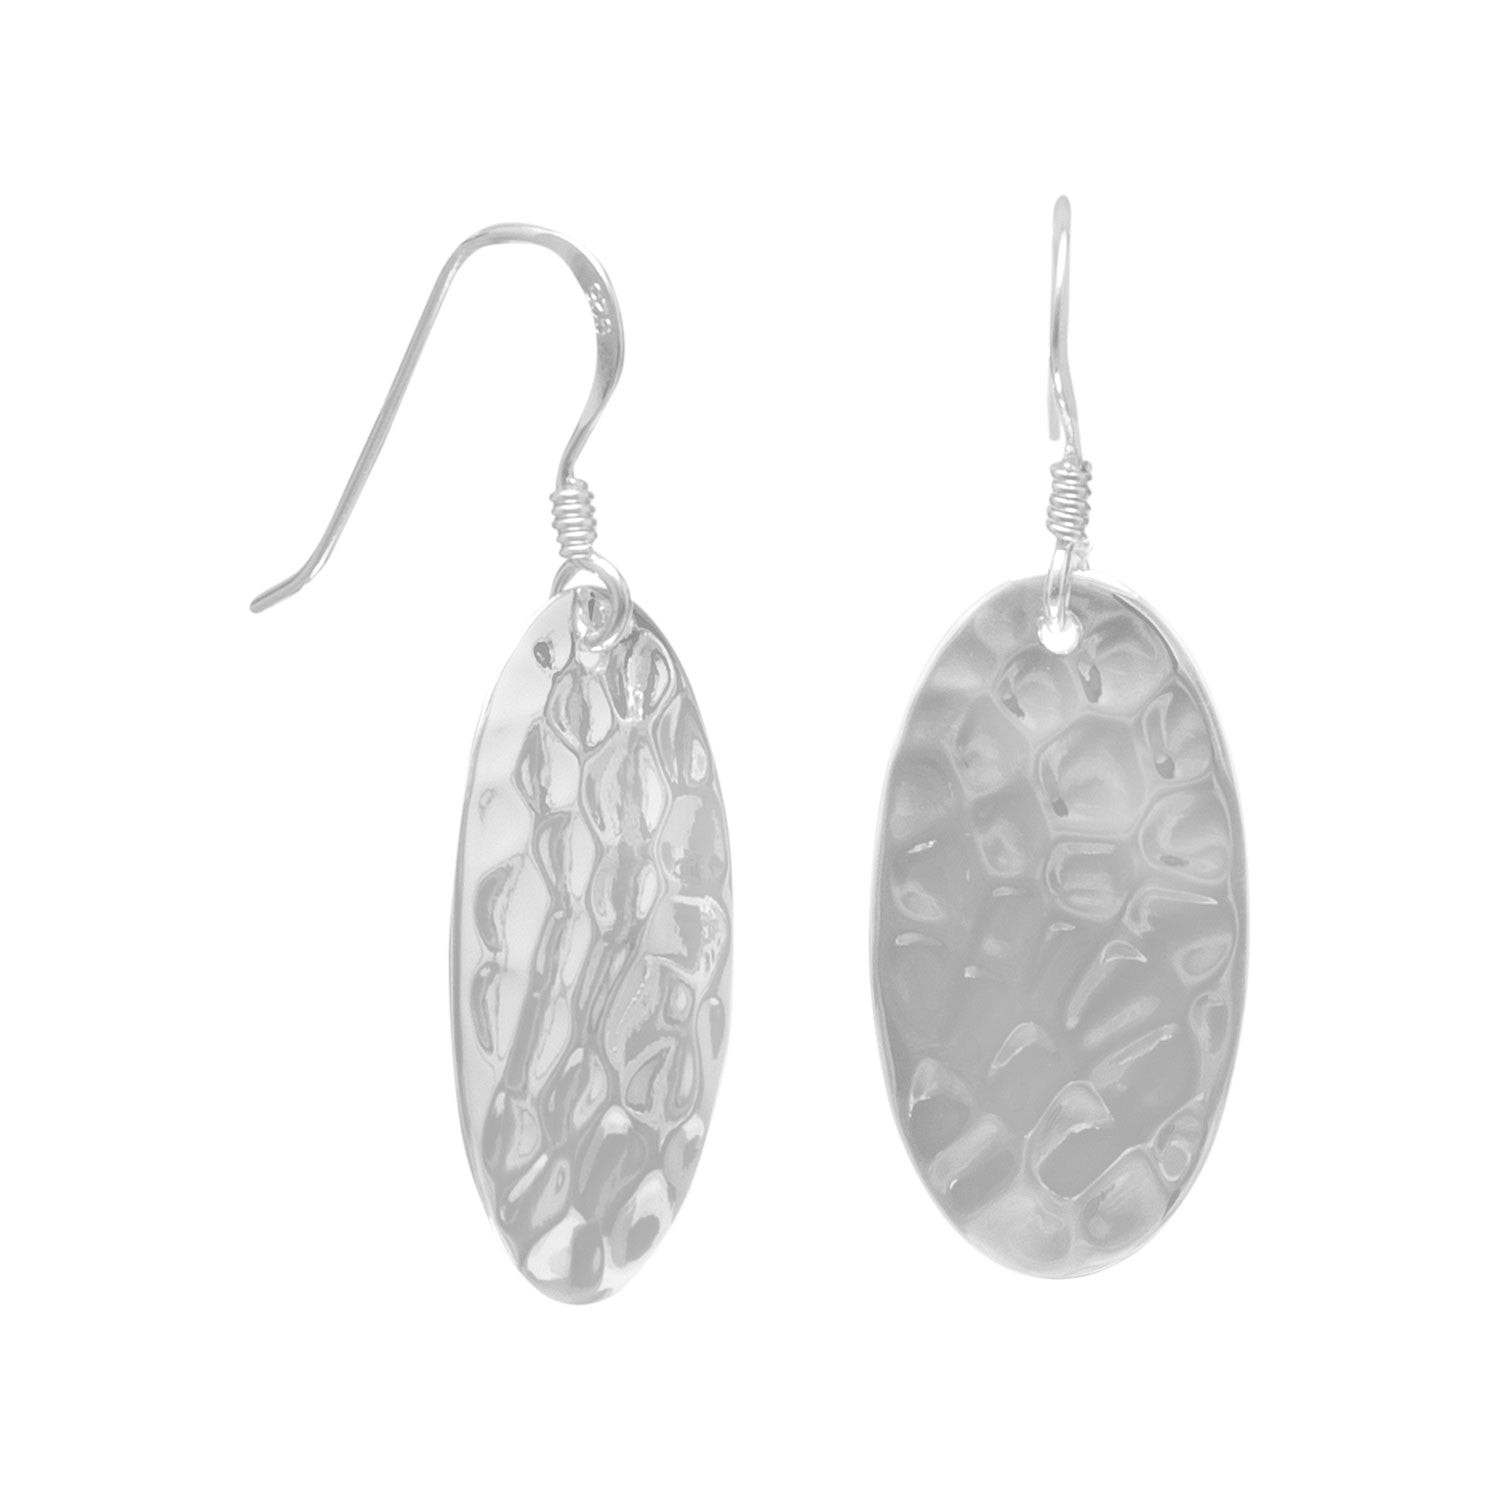 Large Oval Hammered French Wire Earrings